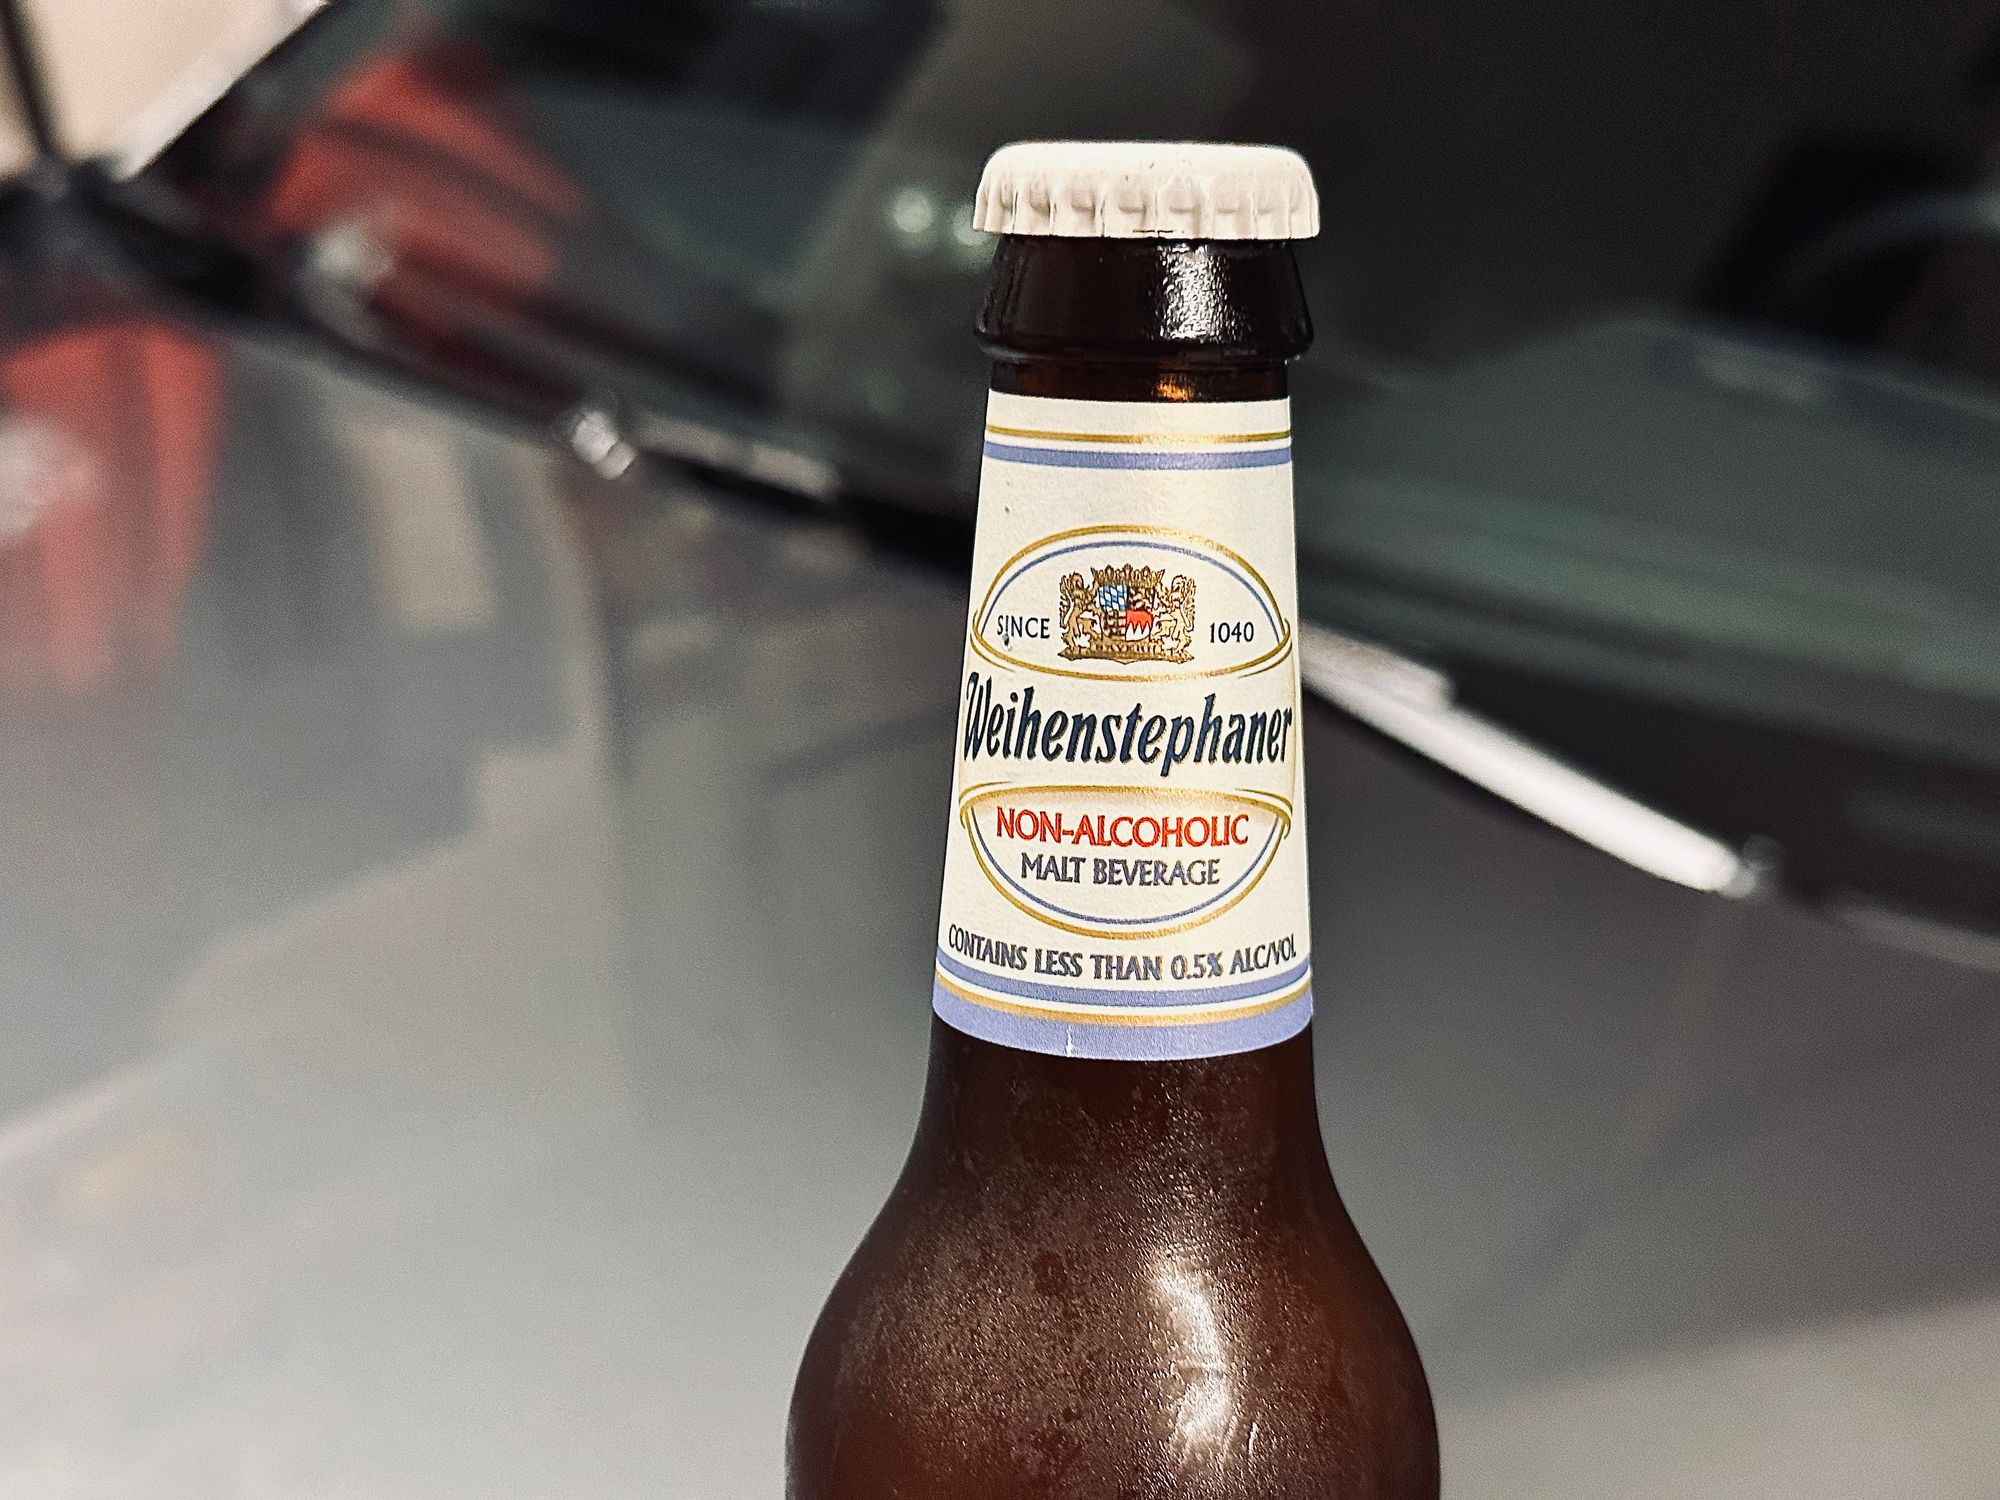 Weihenstephaner Non-Alcoholic Beer (5 Sec. Review)